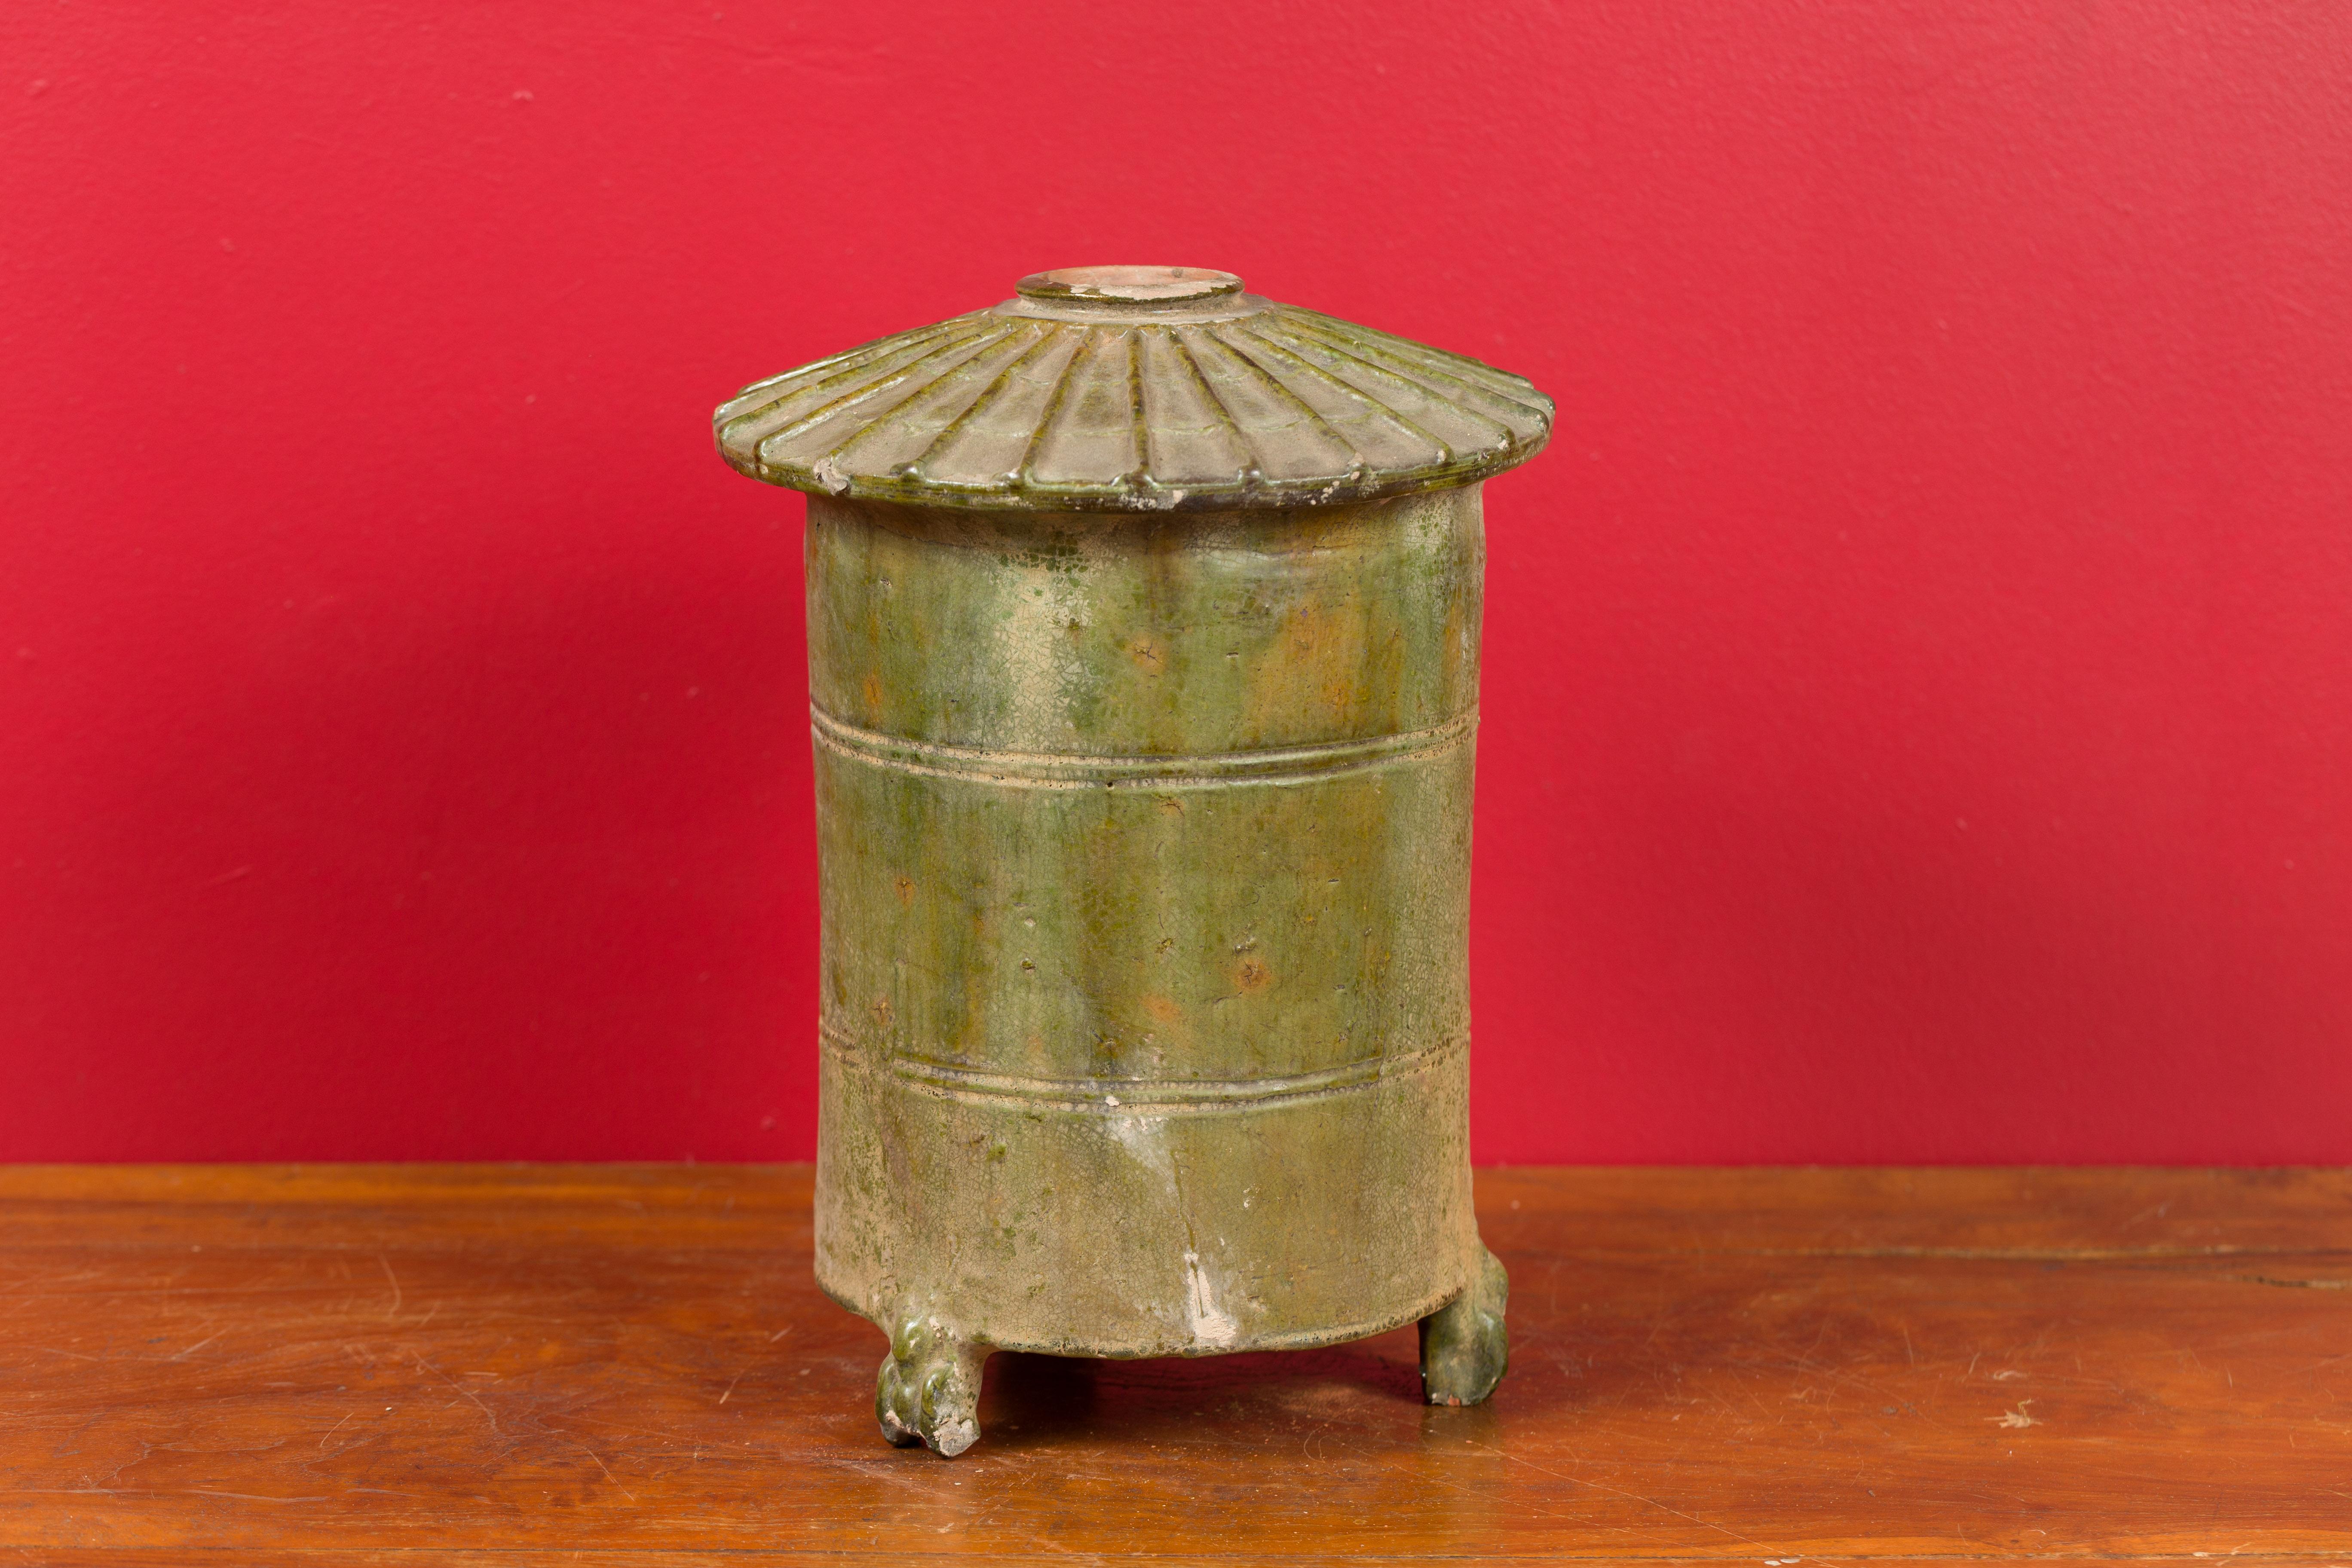 Petit Chinese Ming Dynasty 17th Century Terracotta Granary with Verdigris Patina For Sale 5